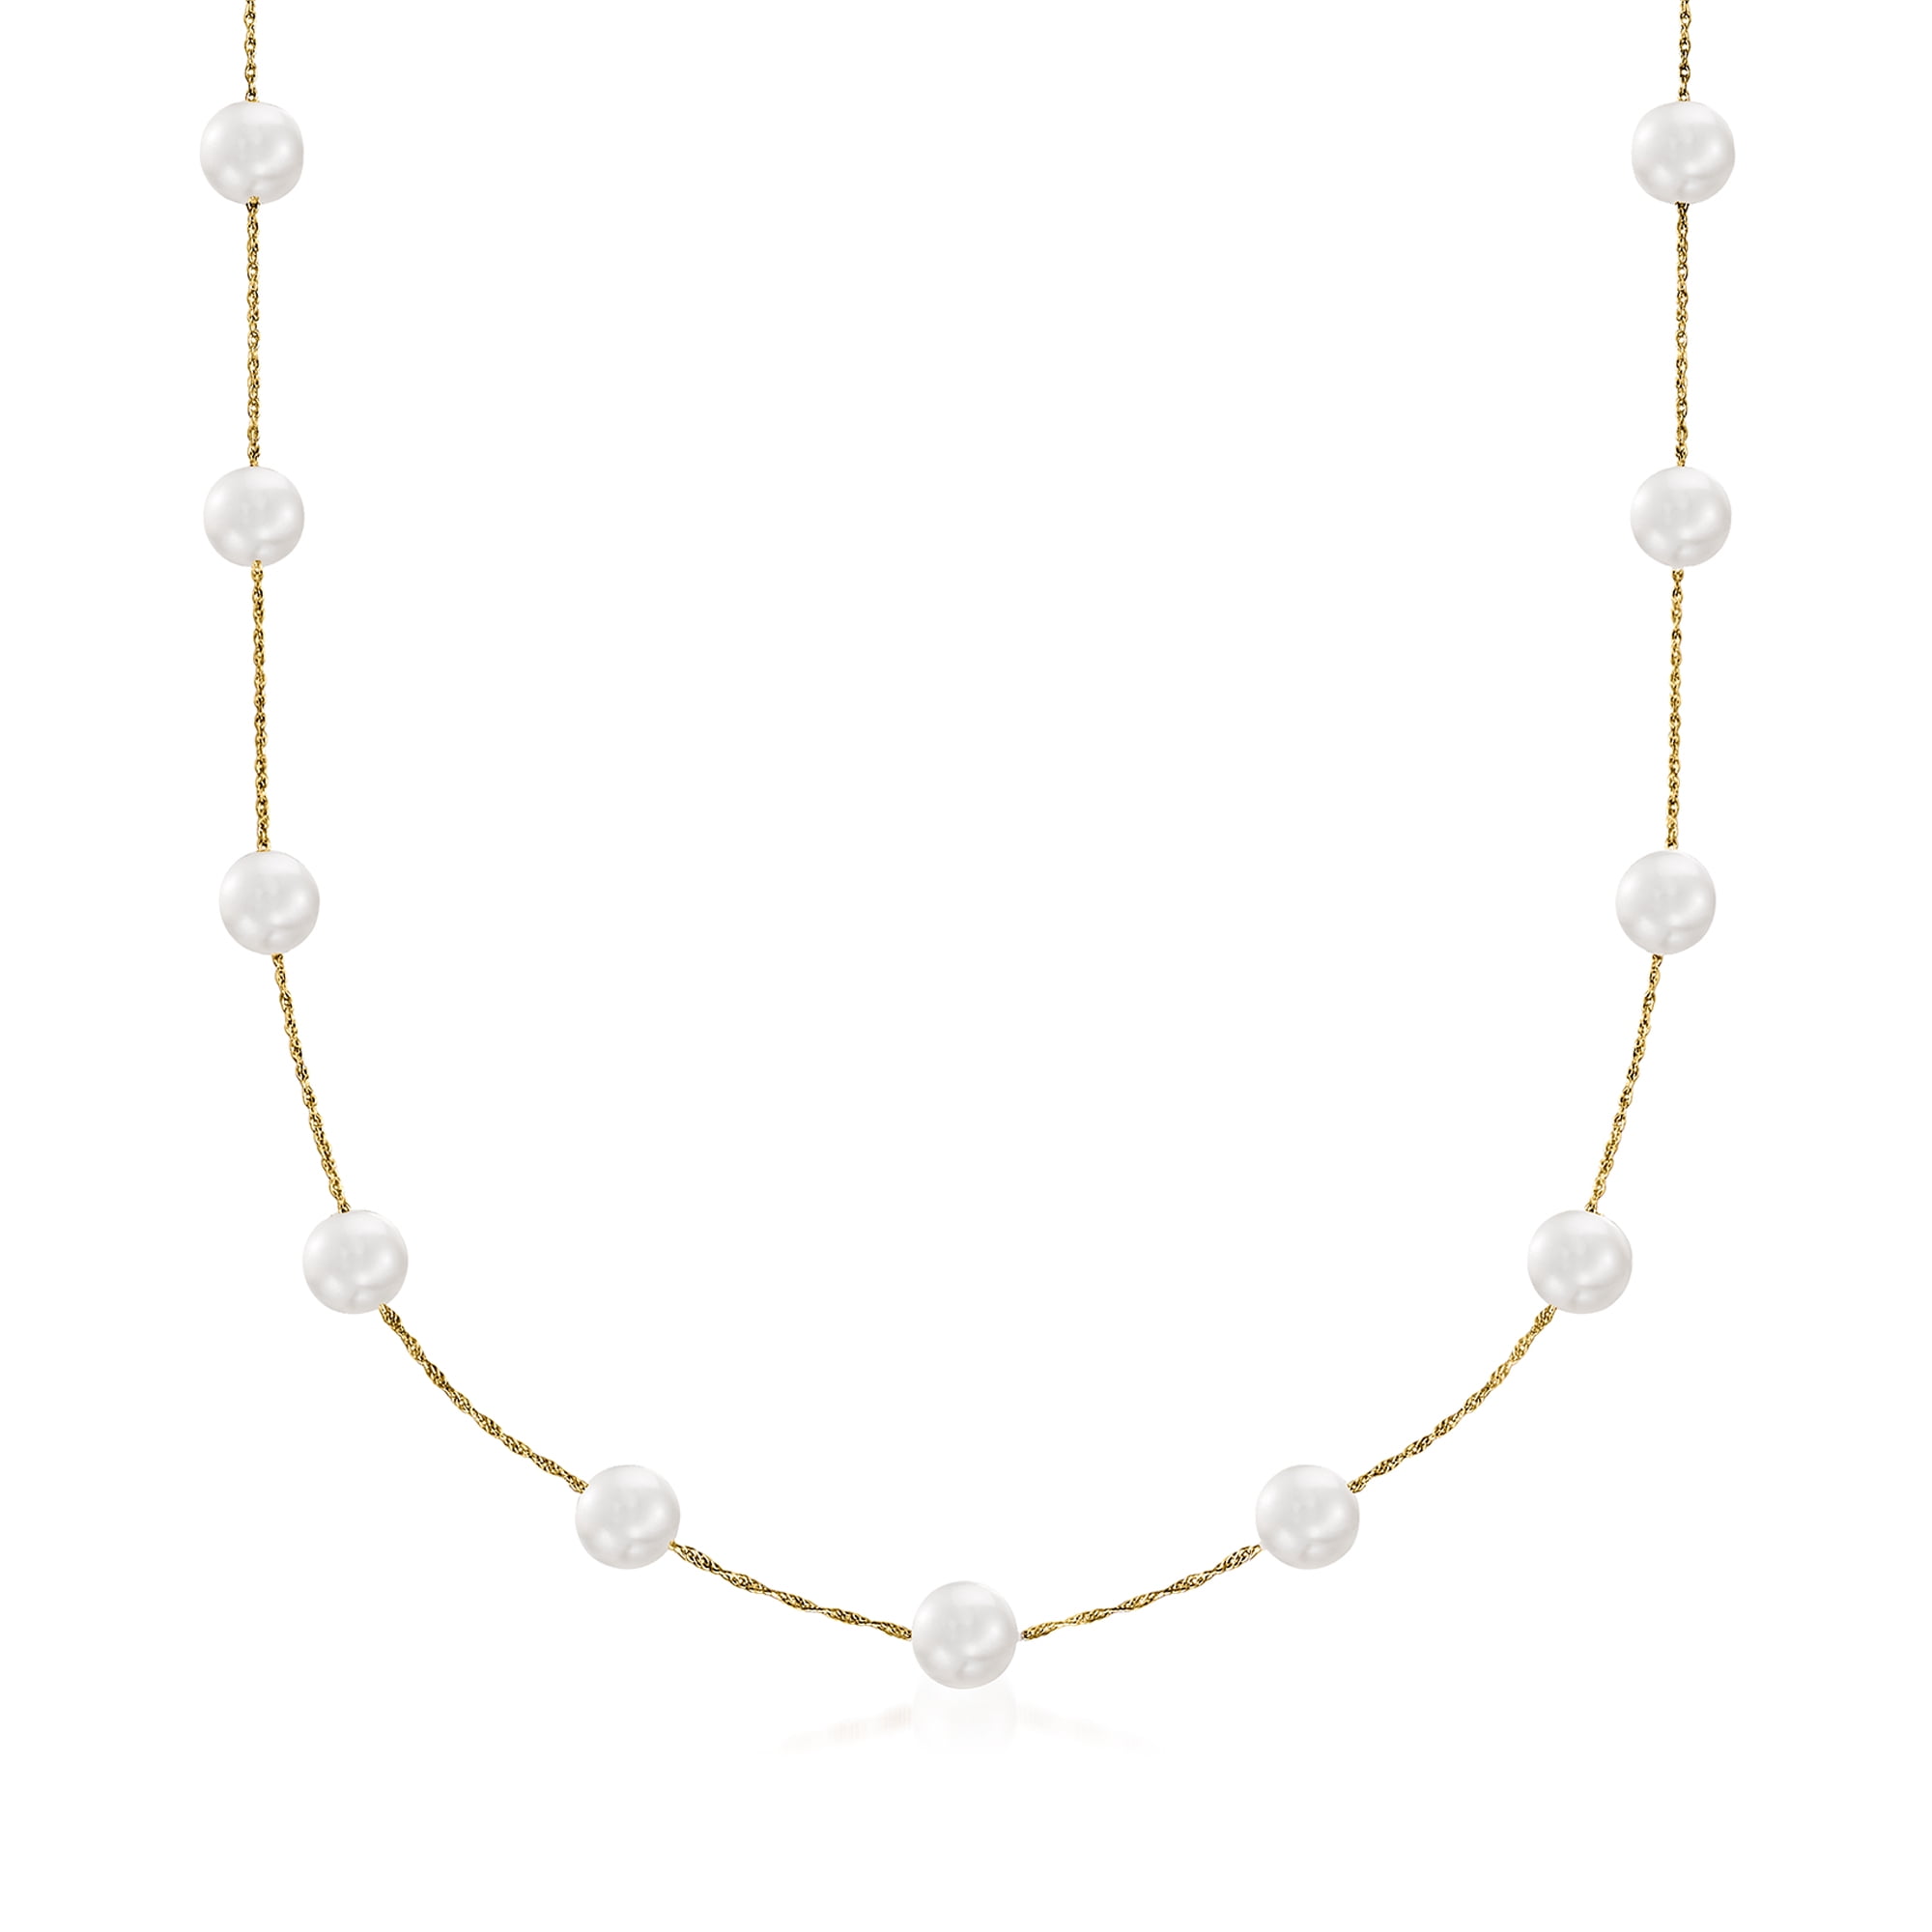 Ross-Simons 6-6.5mm Cultured Pearl Station Necklace in 14kt Yellow Gold ...